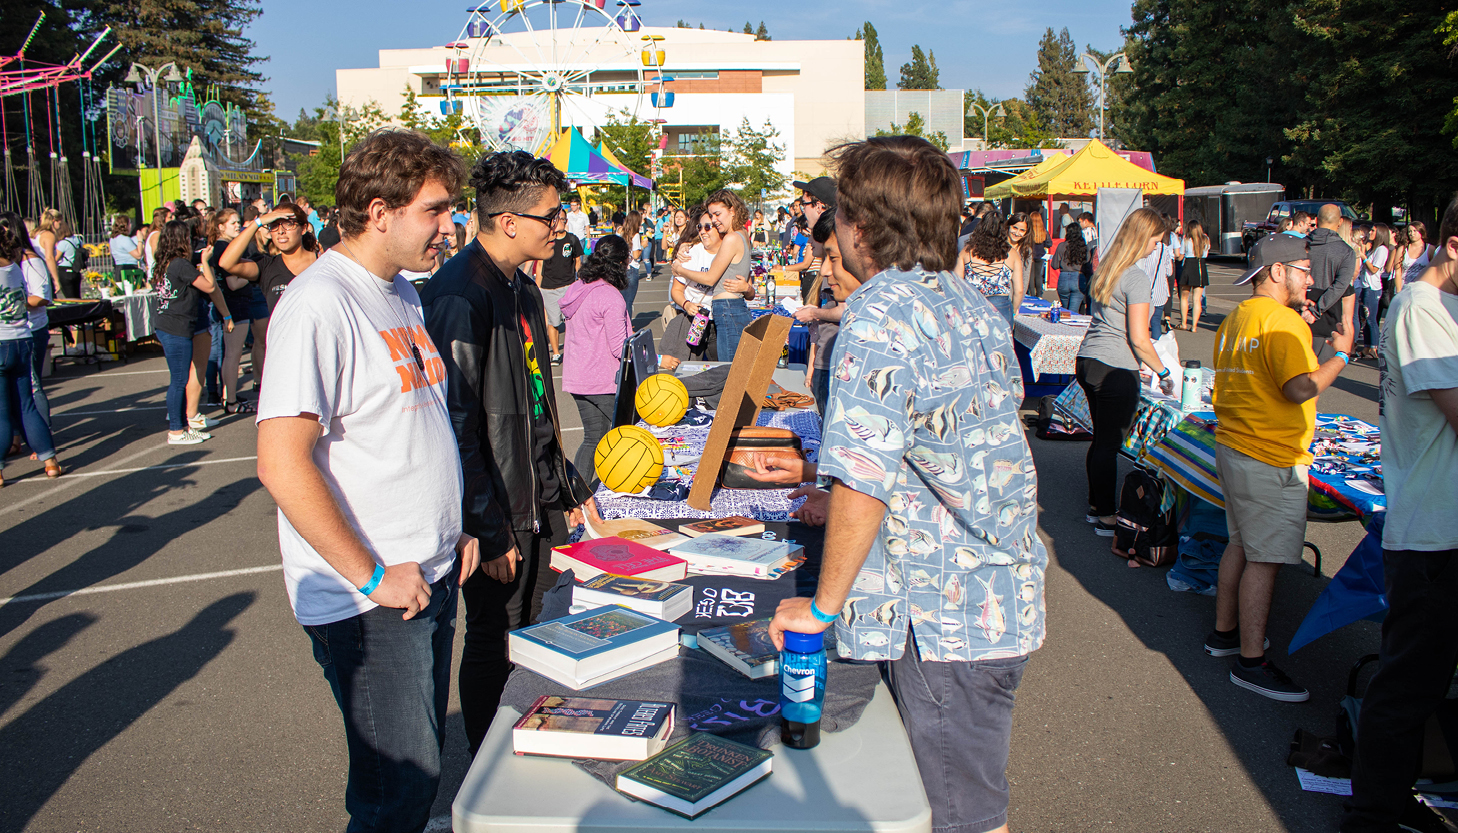 Students talking across a table at a large event with a ferris wheel in background